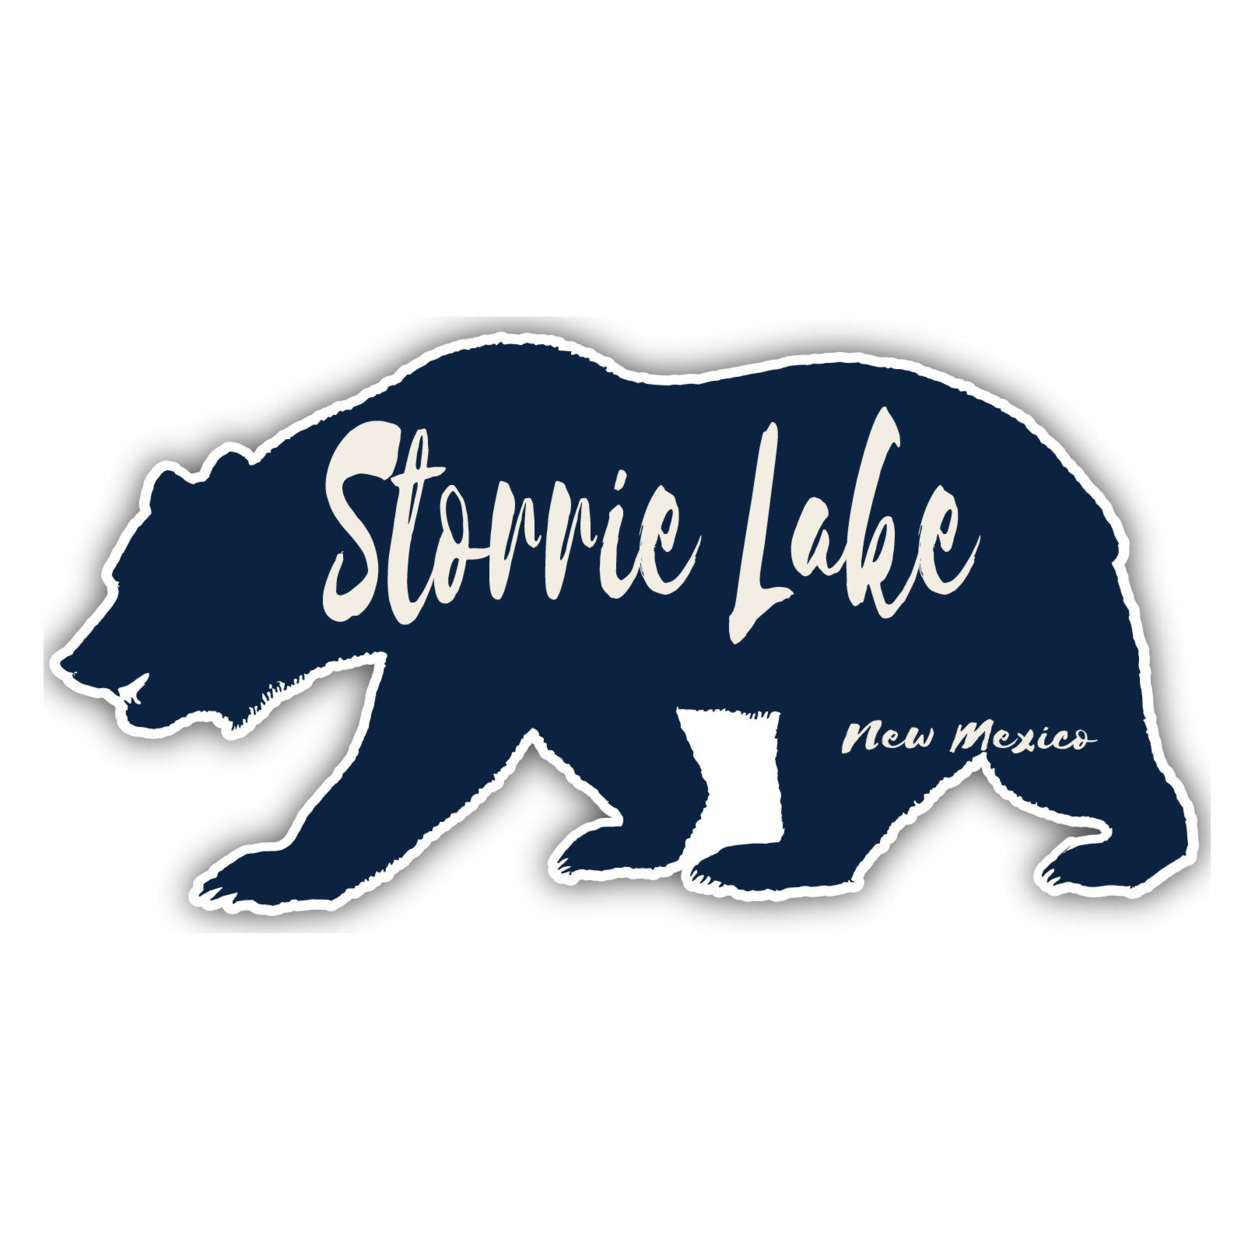 Storrie Lake New Mexico Souvenir Decorative Stickers (Choose Theme And Size) - Single Unit, 2-Inch, Bear